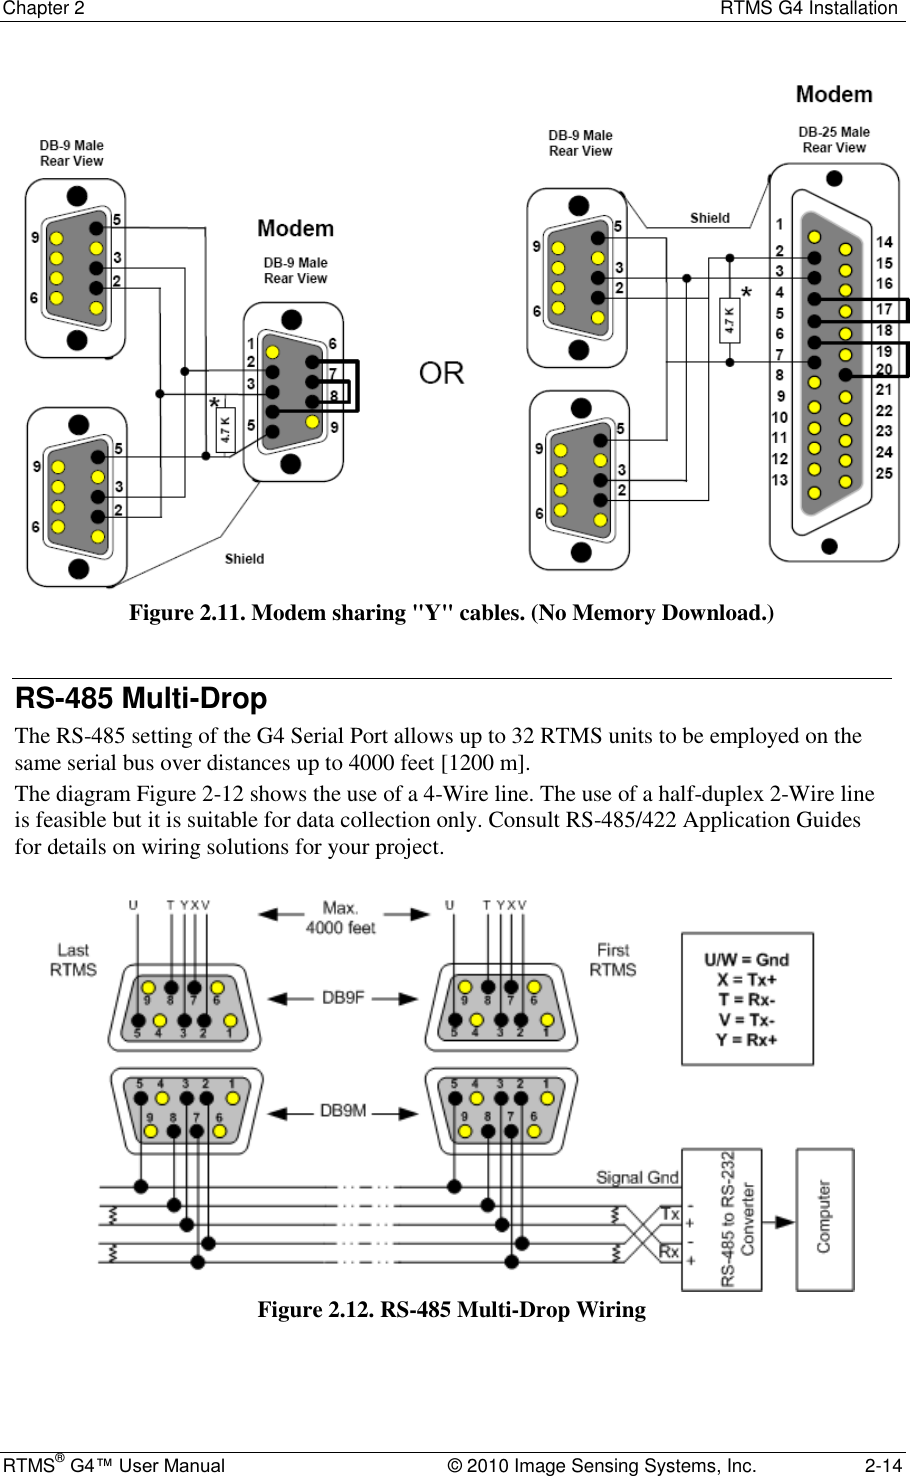 Chapter 2  RTMS G4 Installation RTMS® G4™ User Manual  © 2010 Image Sensing Systems, Inc.  2-14  Figure 2.11. Modem sharing &quot;Y&quot; cables. (No Memory Download.)  RS-485 Multi-Drop The RS-485 setting of the G4 Serial Port allows up to 32 RTMS units to be employed on the same serial bus over distances up to 4000 feet [1200 m]. The diagram Figure 2-12 shows the use of a 4-Wire line. The use of a half-duplex 2-Wire line is feasible but it is suitable for data collection only. Consult RS-485/422 Application Guides for details on wiring solutions for your project.   Figure 2.12. RS-485 Multi-Drop Wiring    